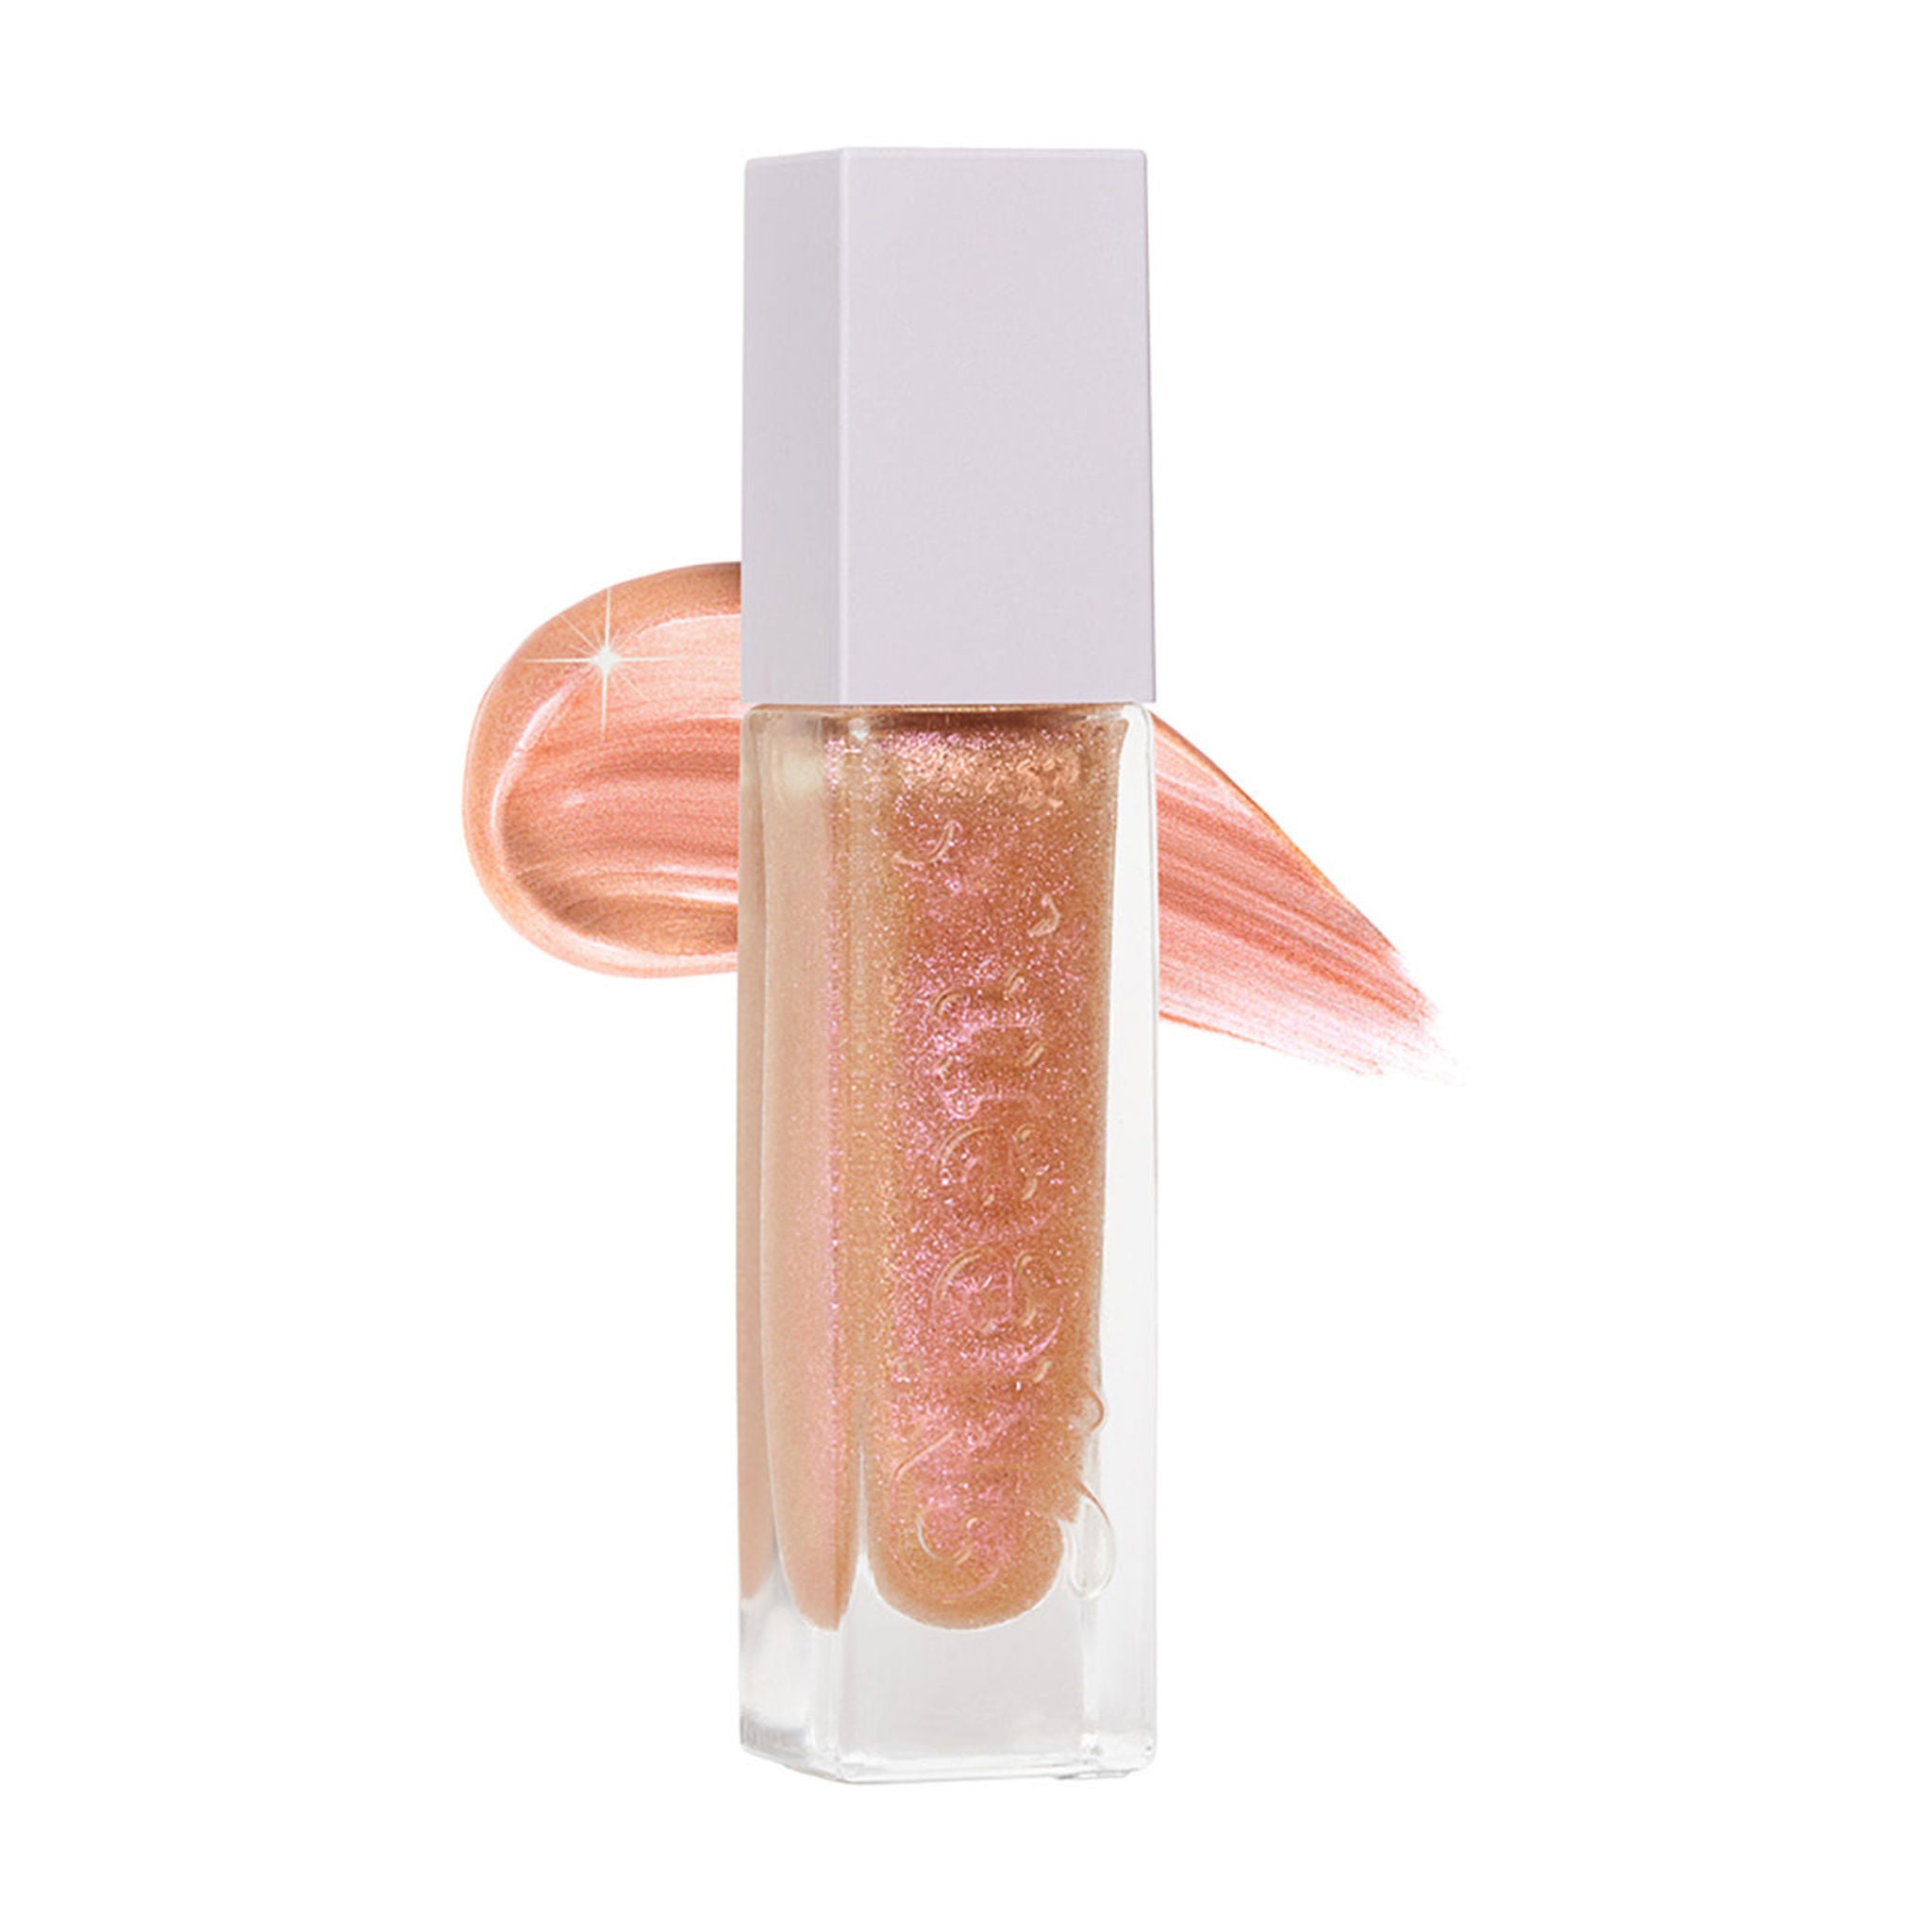 Neen Glisten Up Lip Gloss Color/Shade variant: Bye main image. This product is in the color clear